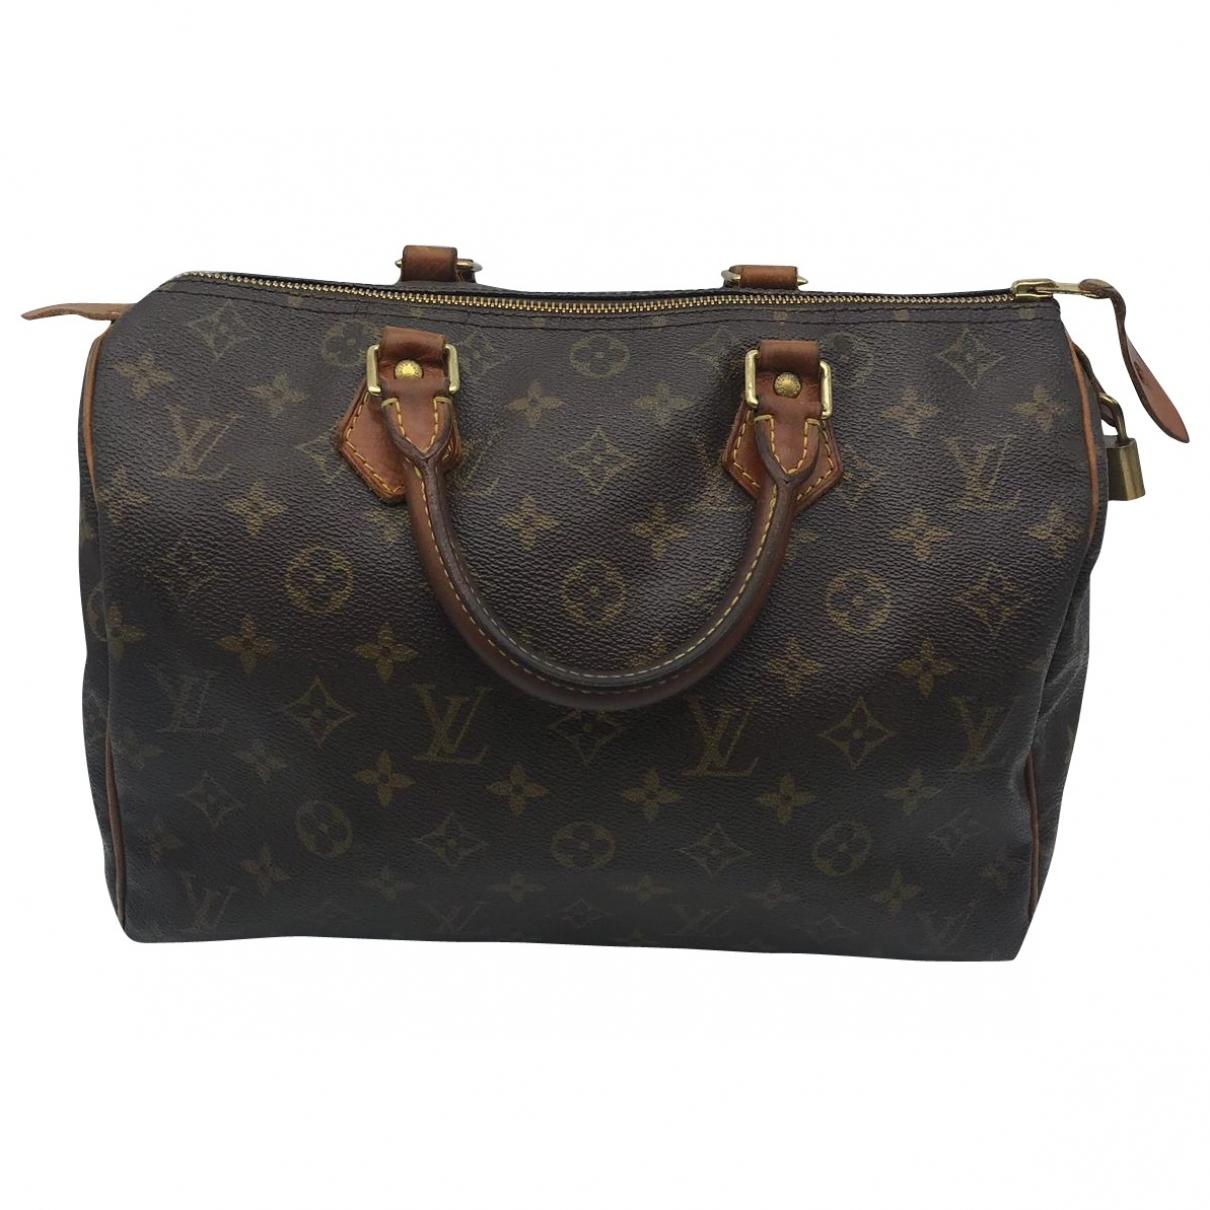 Lyst - Louis Vuitton Pre-owned Vintage Speedy Other Leather Handbags in Black